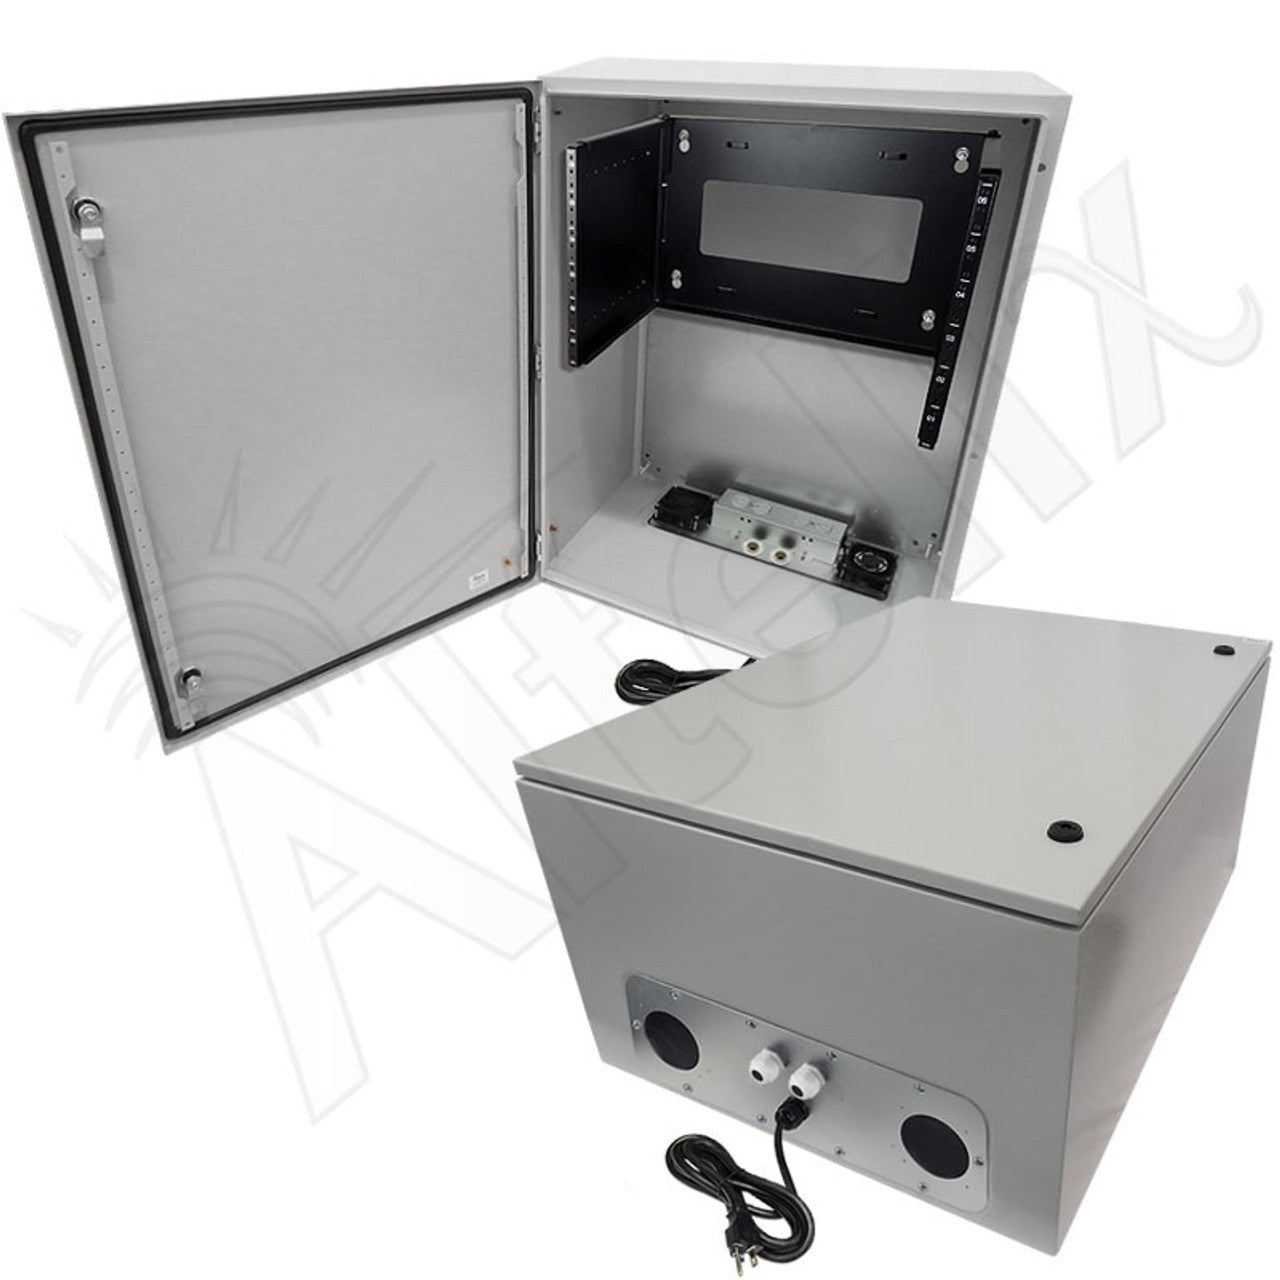 Altelix 120VAC 20A Steel NEMA Enclosure for UPS Power Systems with 19" Wide 6U Rack, Dual Cooling Fans, 20A Power Outlets & Power Cord